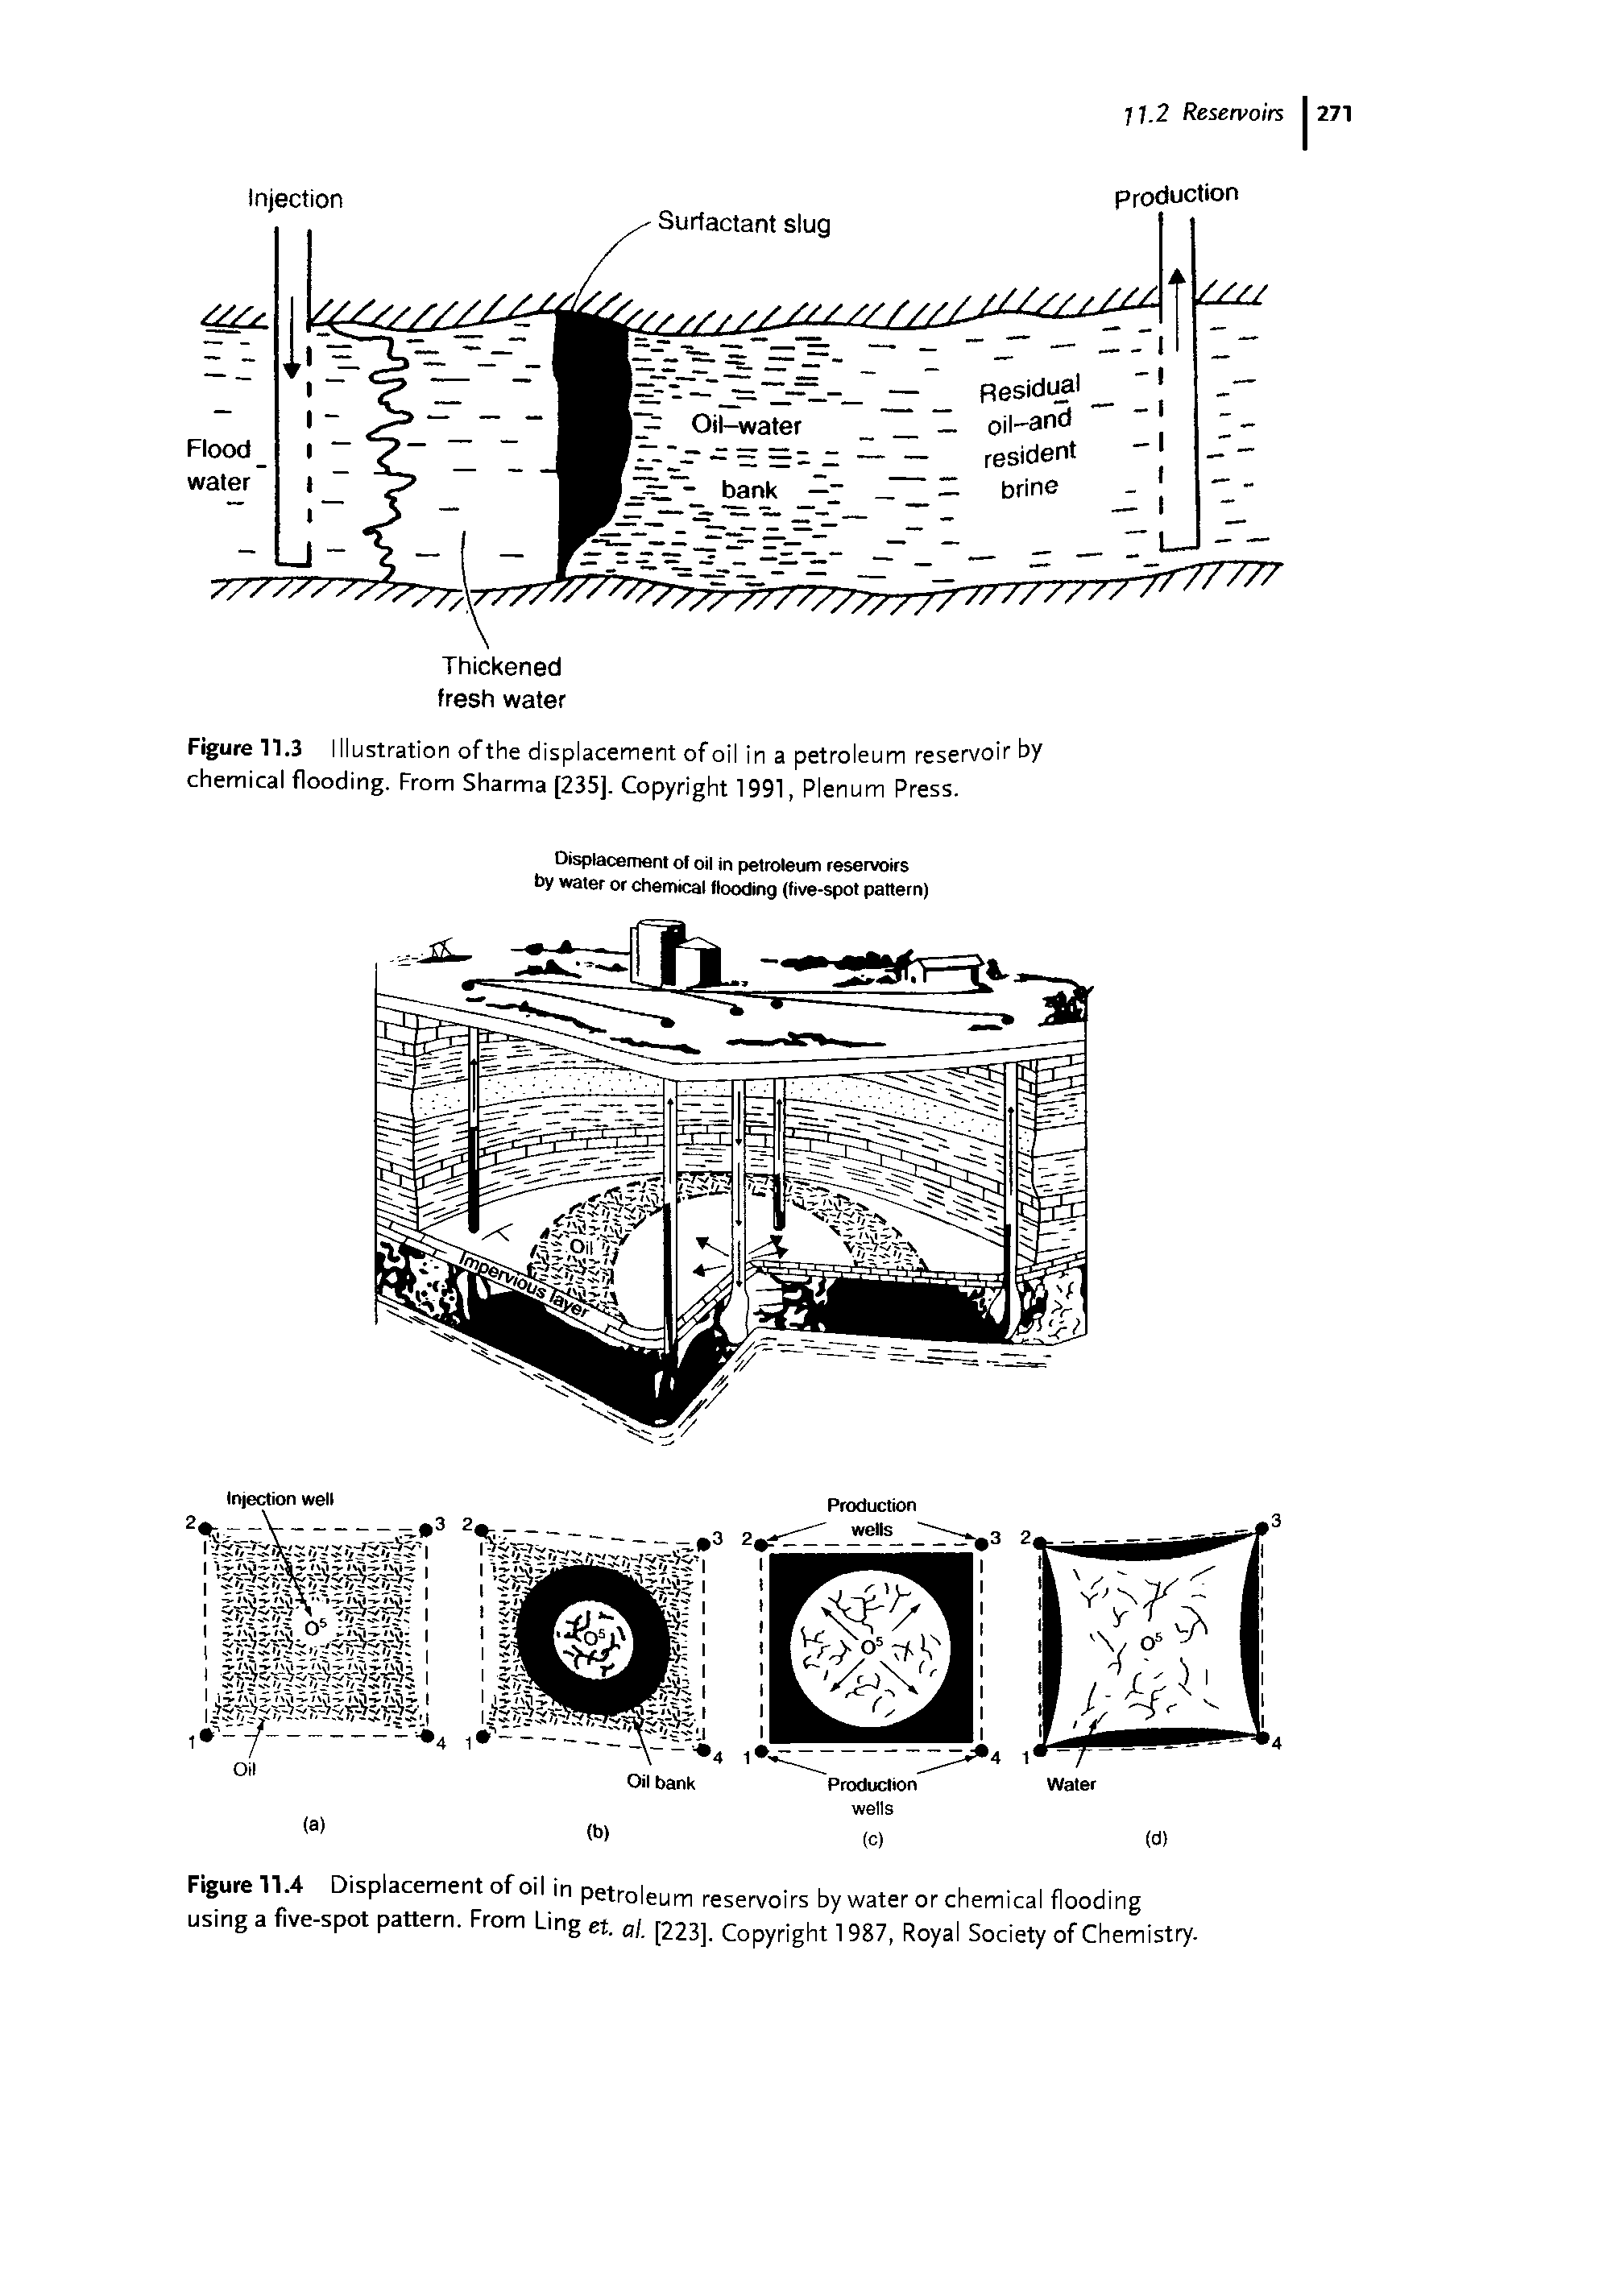 Figure 11.4 Displacement of oil in petroleum reservoirs by water or chemical flooding using a five-spot pattern. From Ling et. a. [223], Copyright 1987, Royal Society of Chemistry.